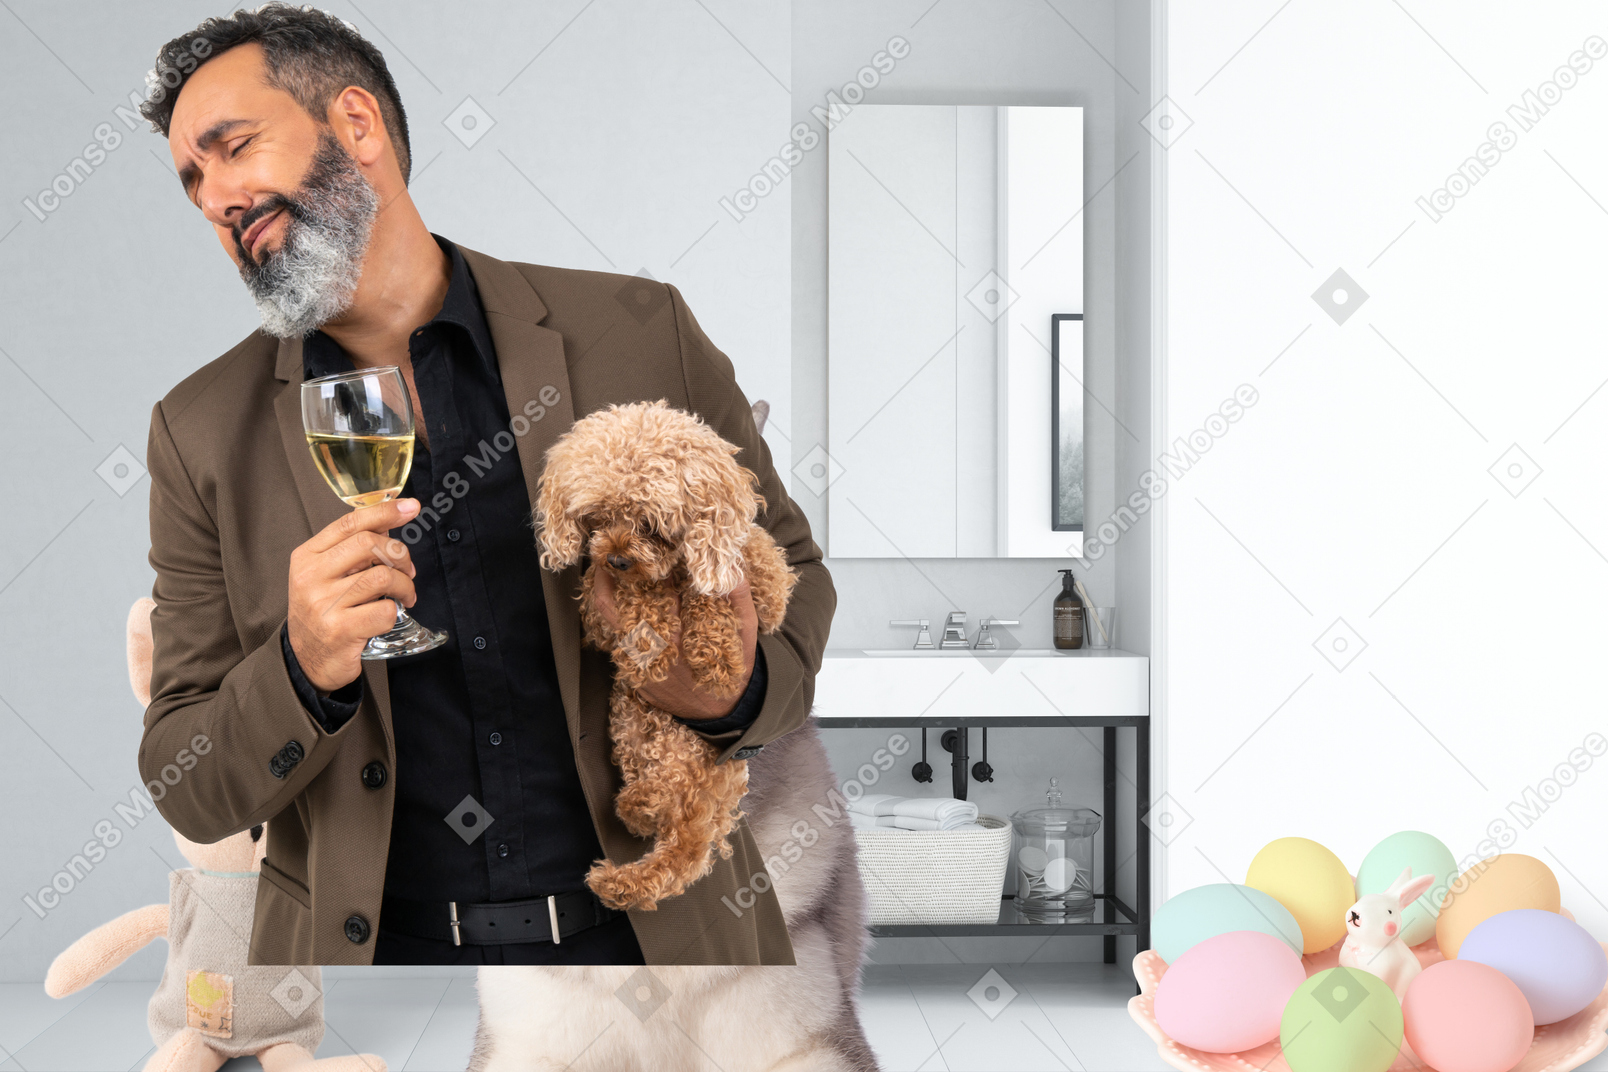 A man holding a glass of wine and a dog